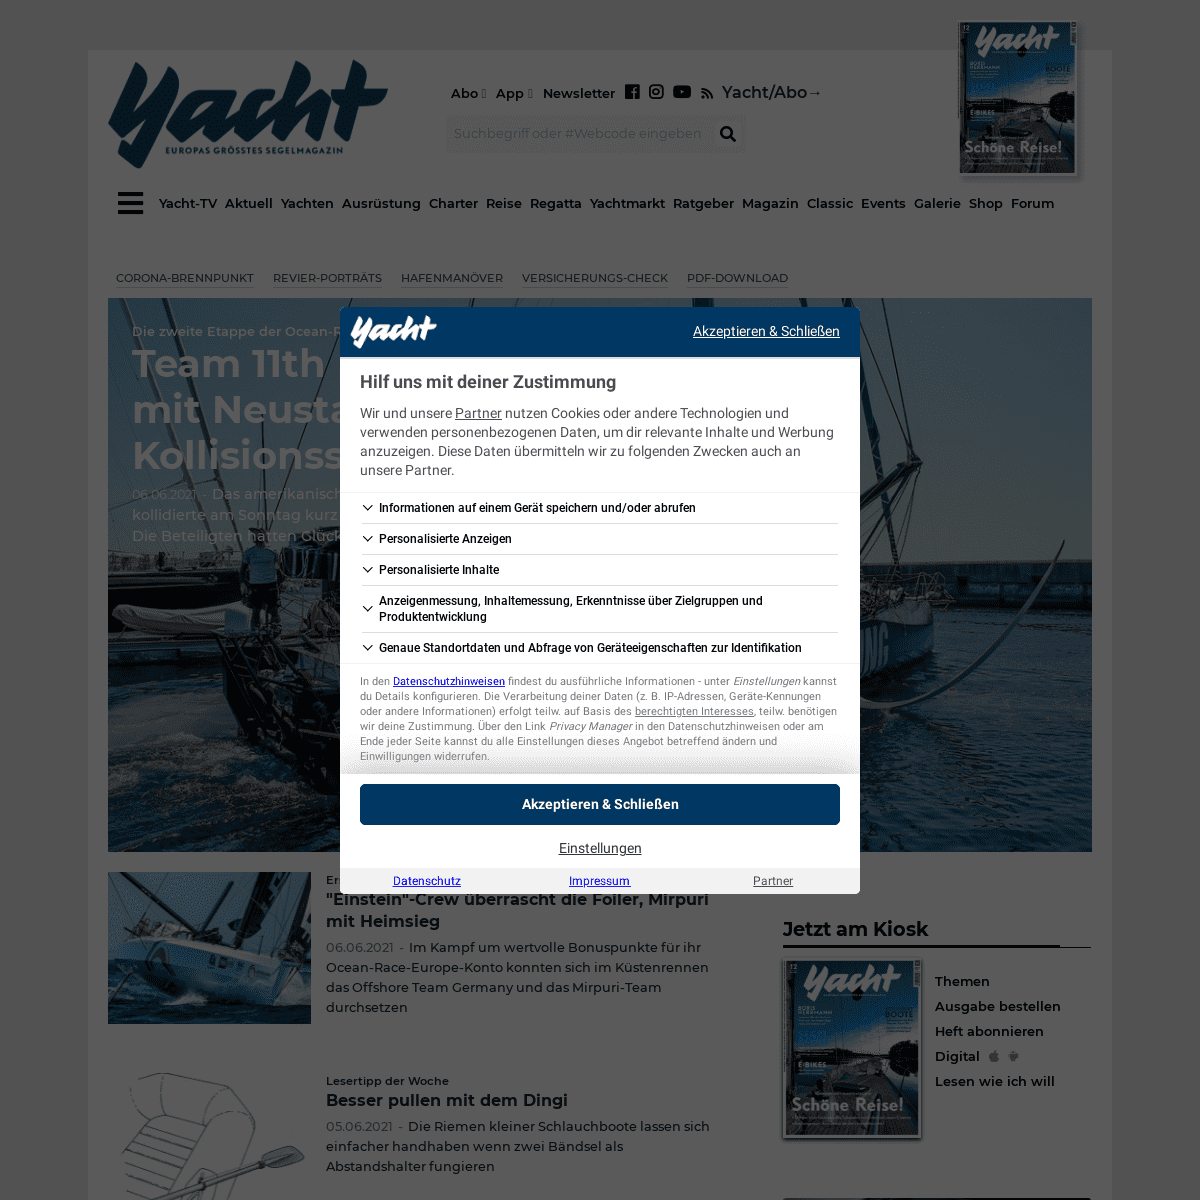 A complete backup of https://yacht.de